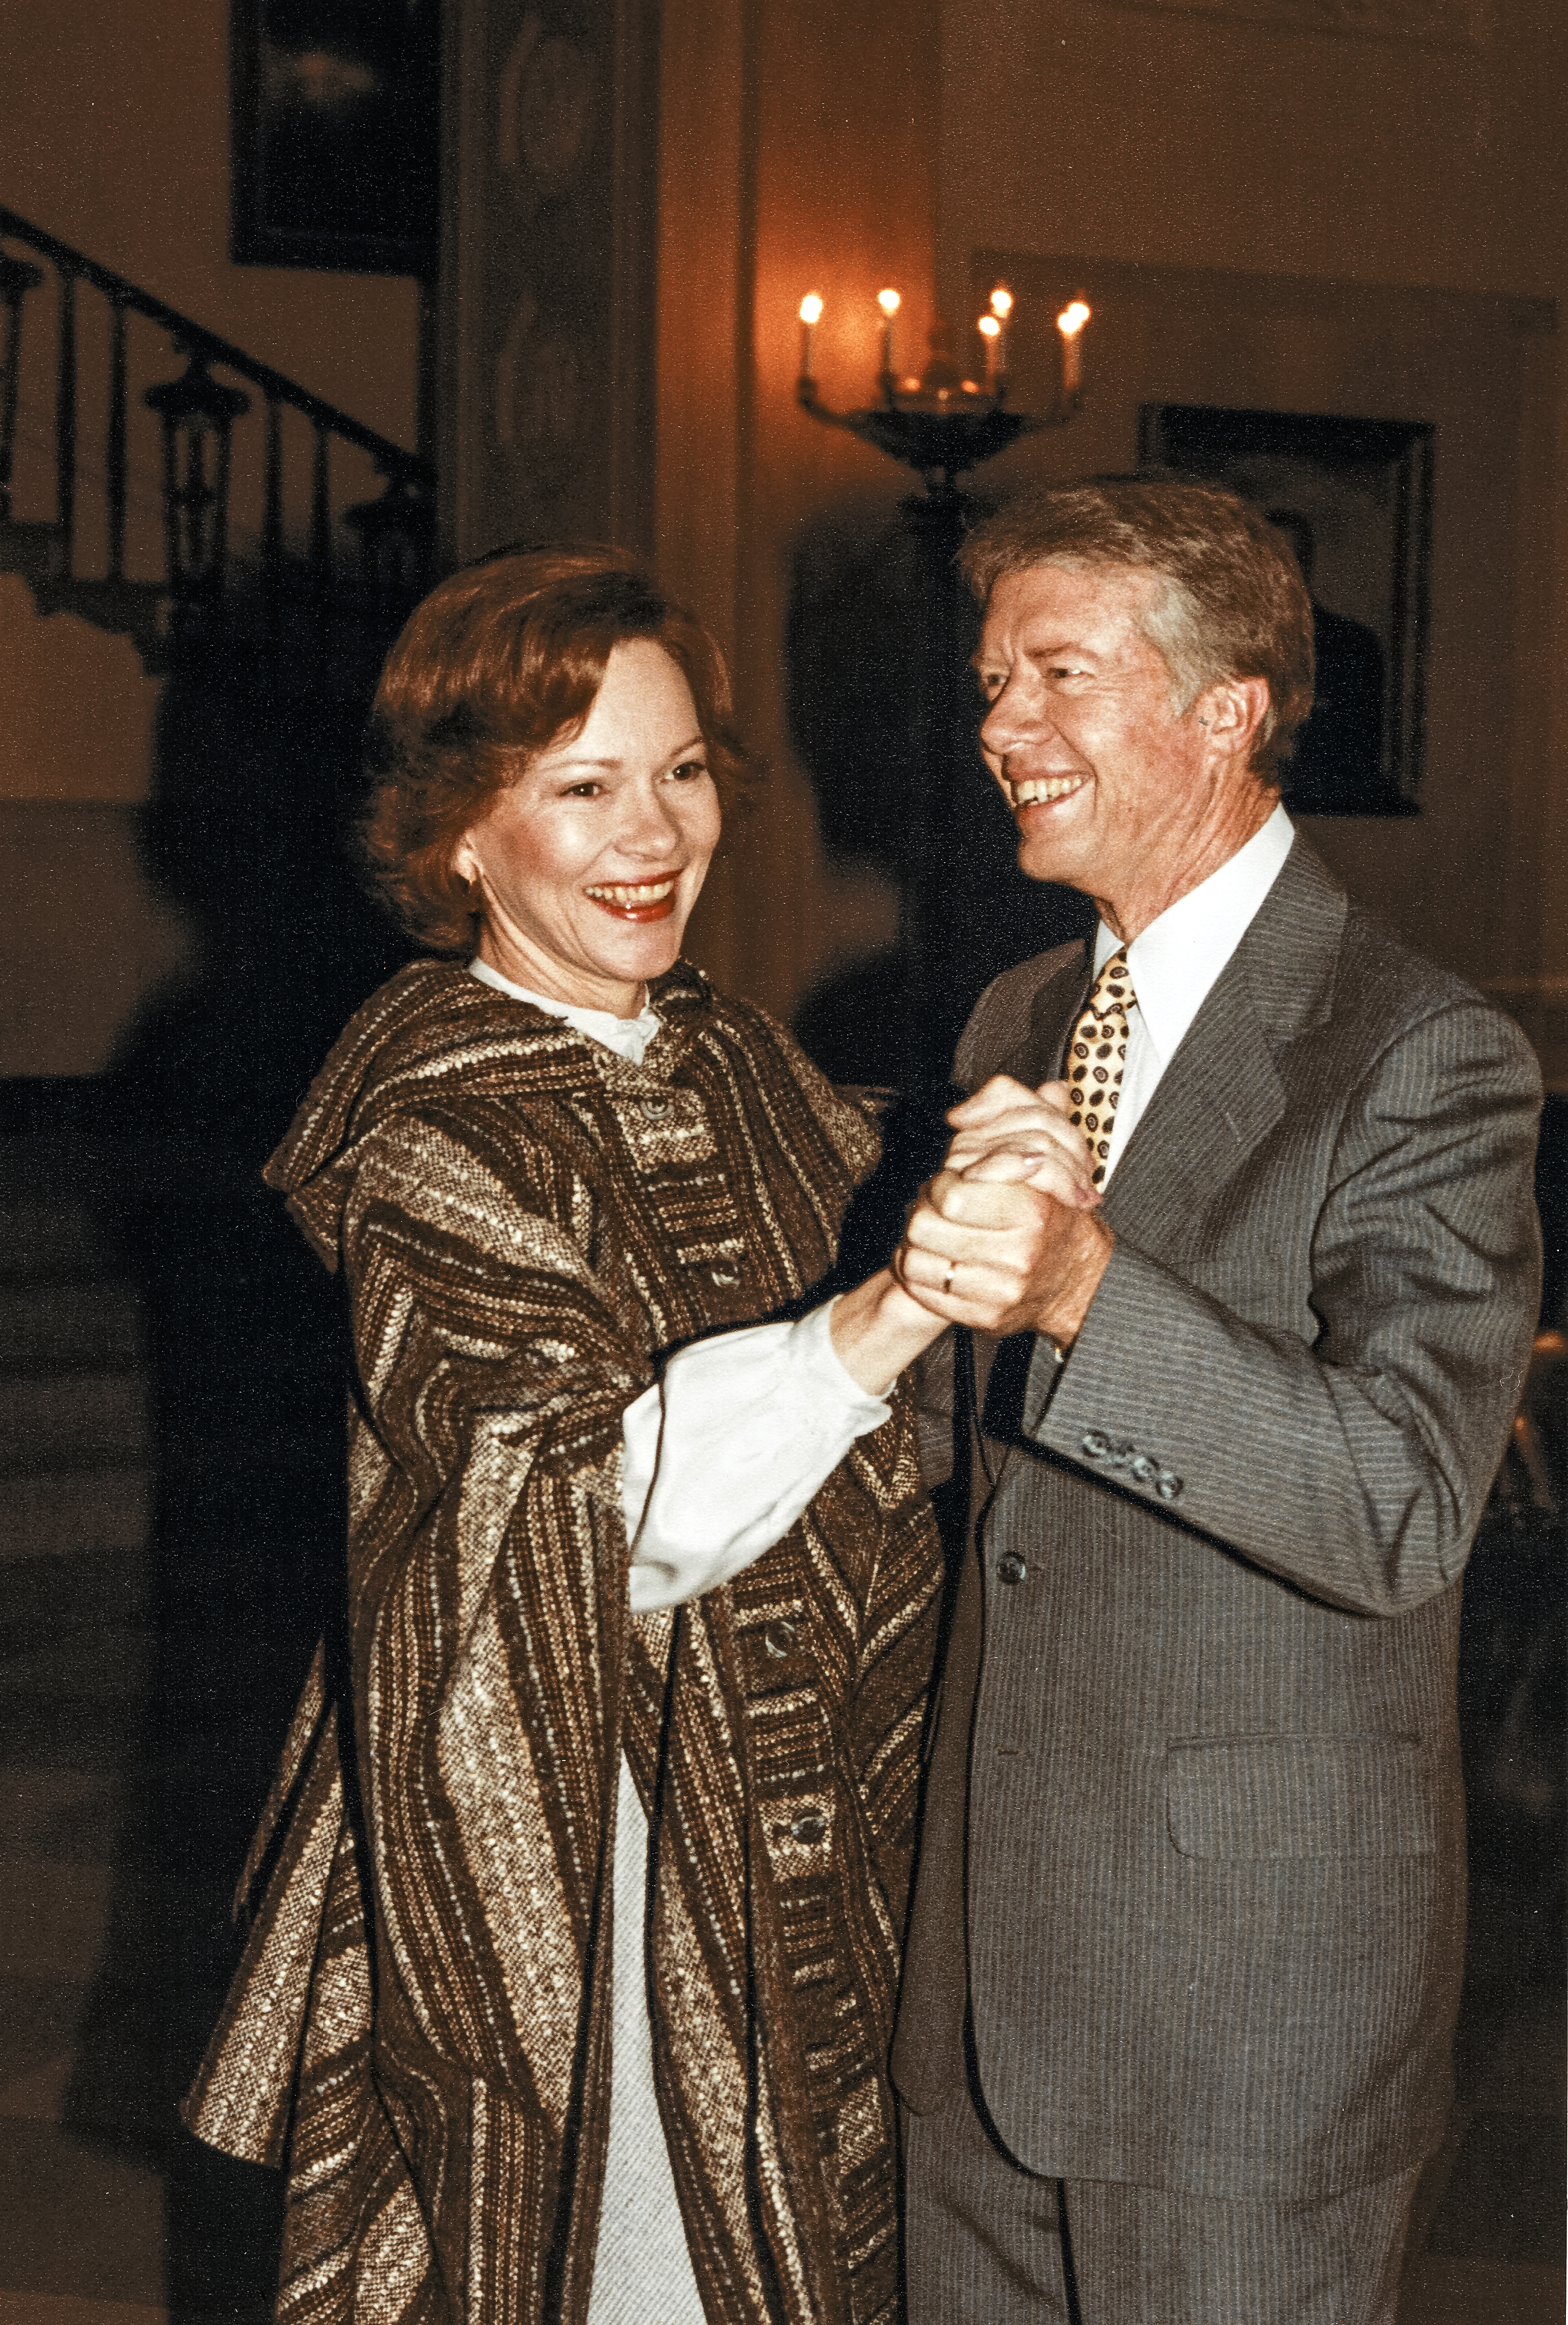 Rosalynn and Jimmy Carter smile as they dance together in the grand foyer of the White House, in Washington D.C., on January 31, 1979 | Source: Getty Images